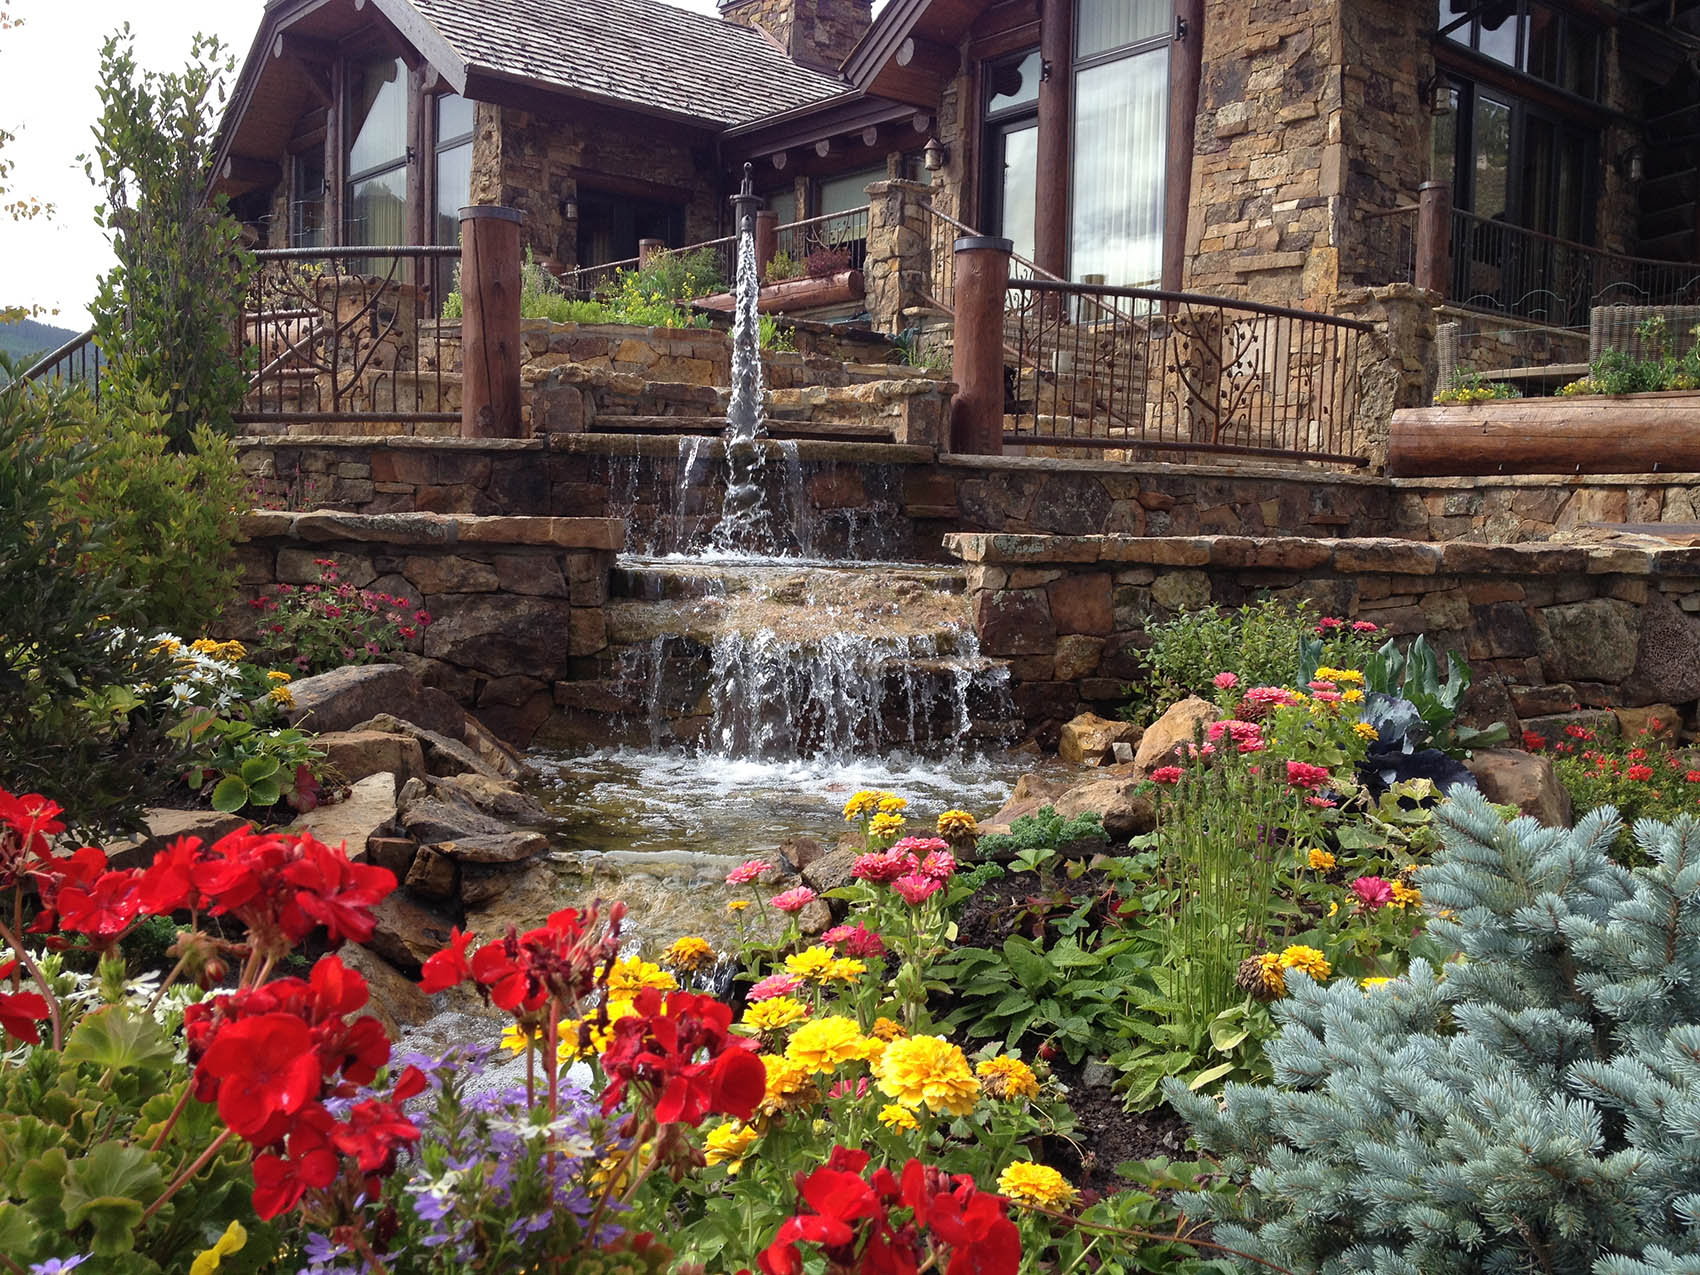 A cascading waterfall flows in front of a stone house with a wooden balcony, surrounded by vibrant flowers and lush greenery in a serene setting.